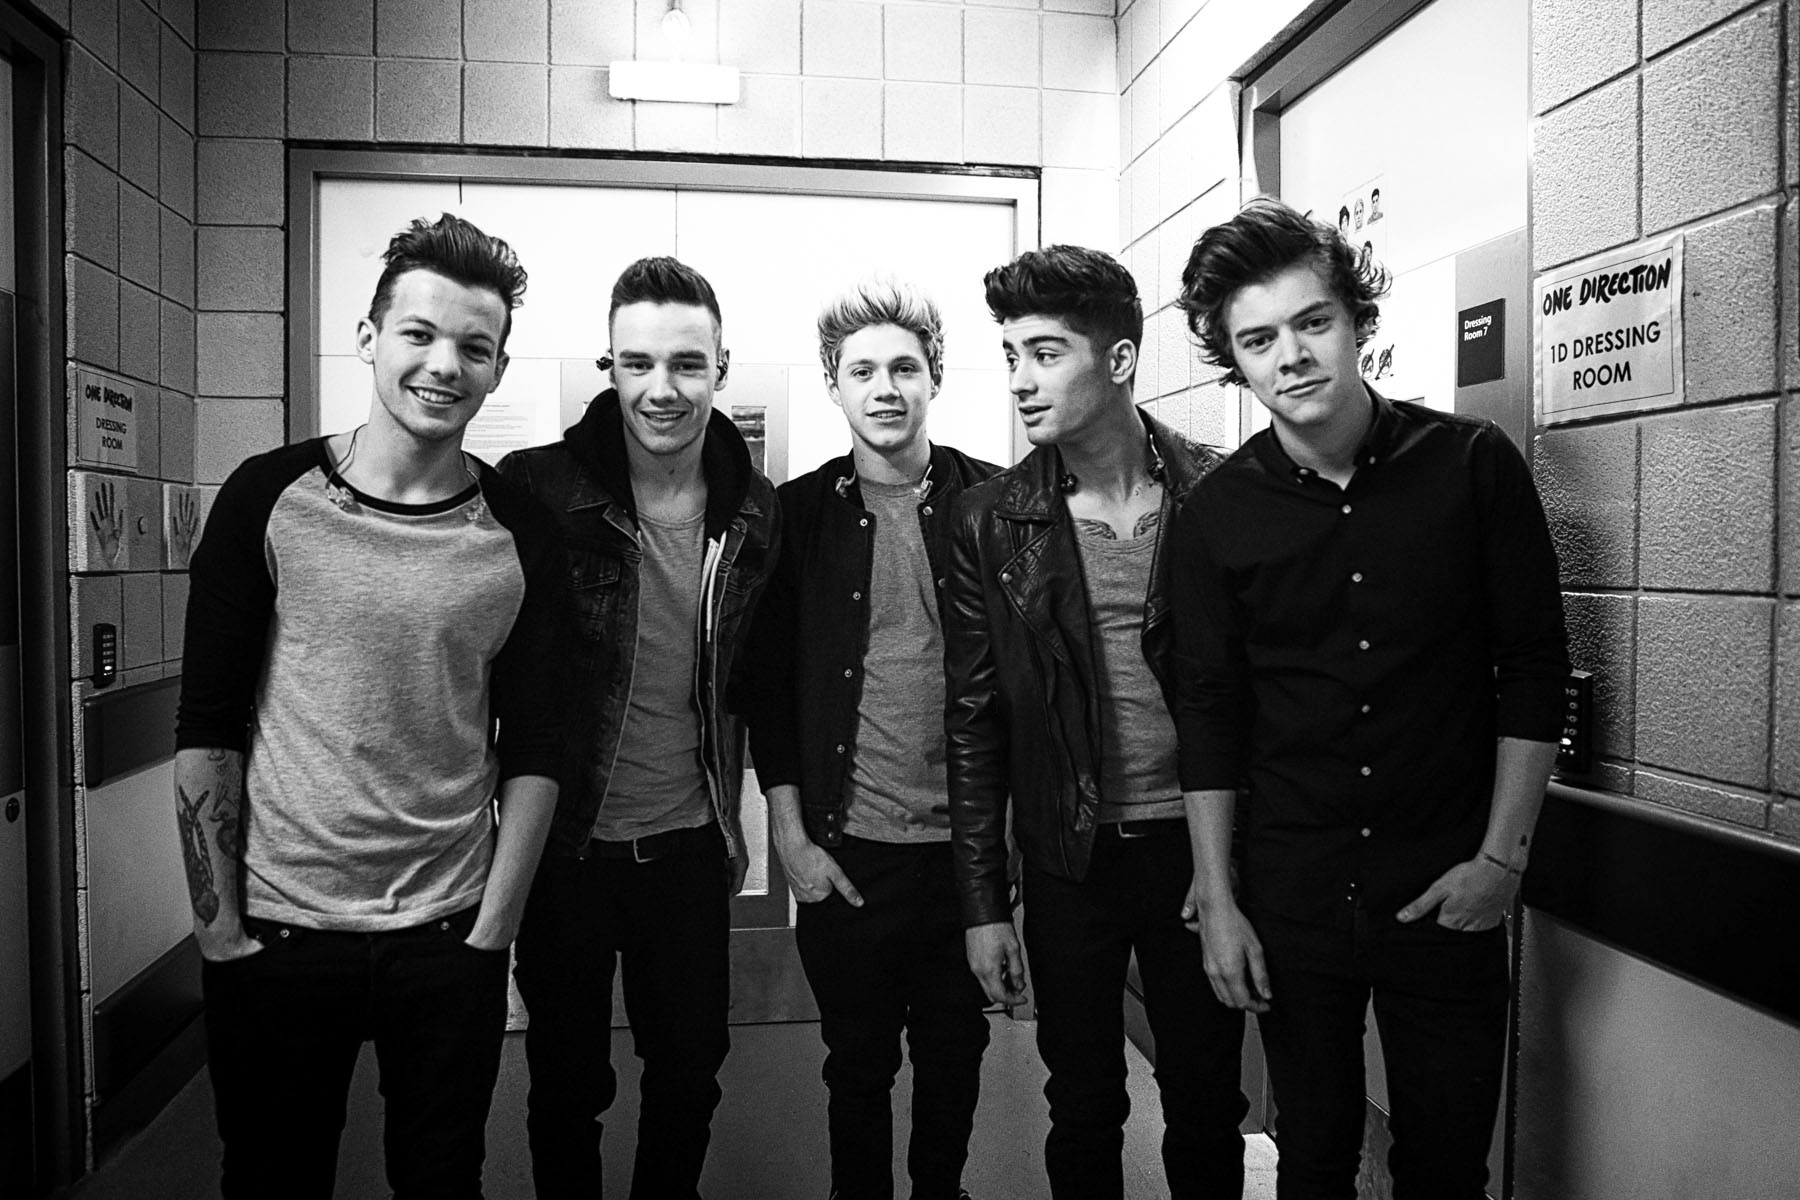 One Direction in London by Christie Goodwin